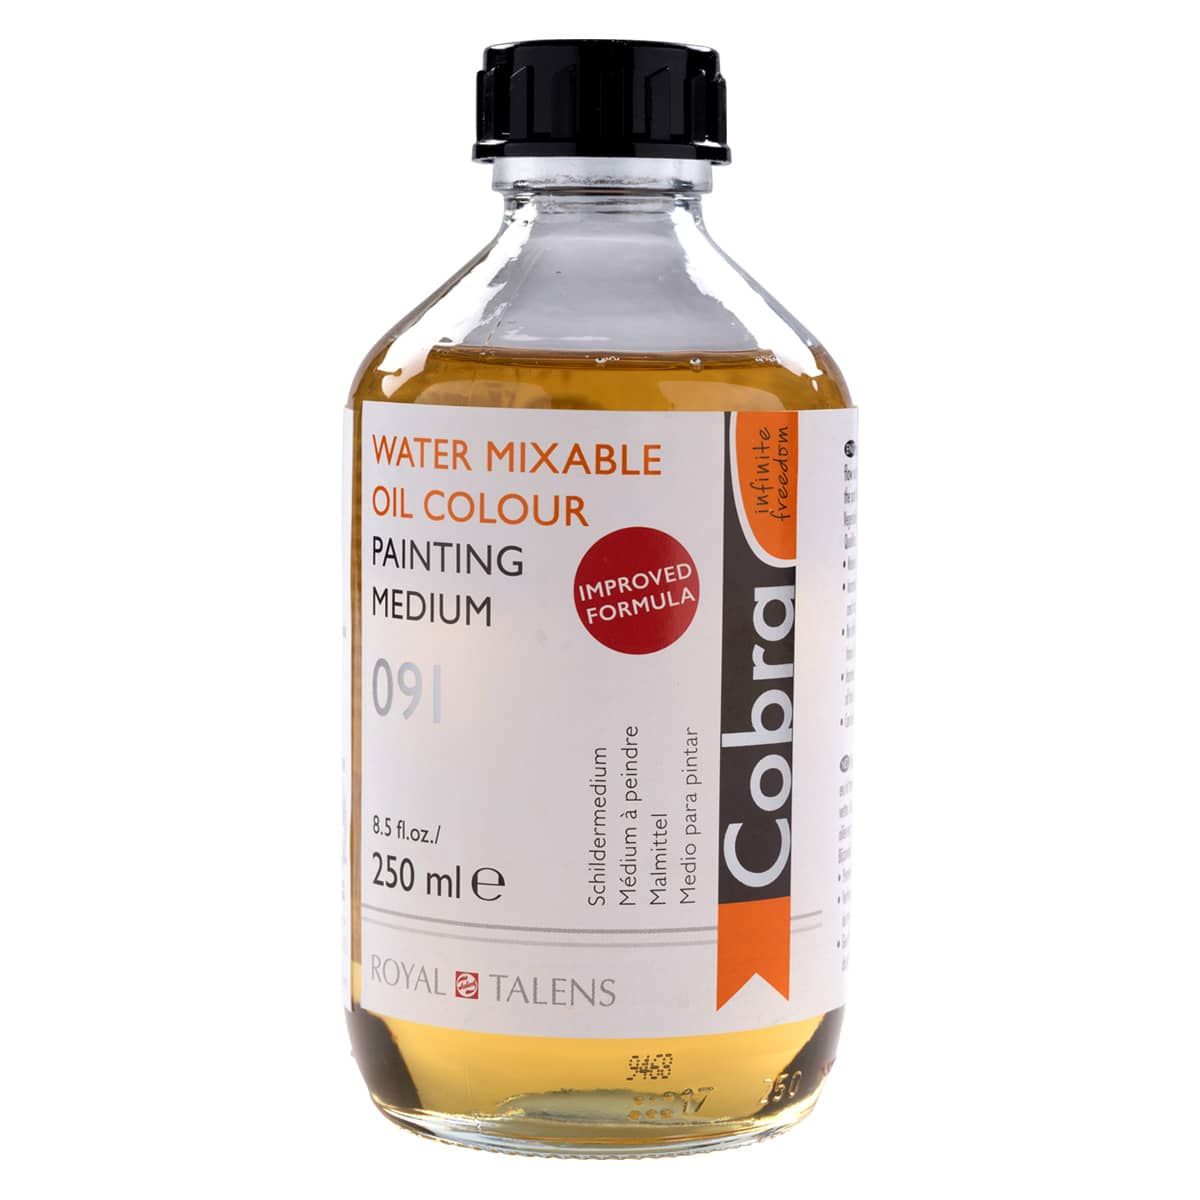 Cobra Water-Mixable Oil Painting Medium, 250ml Bottle